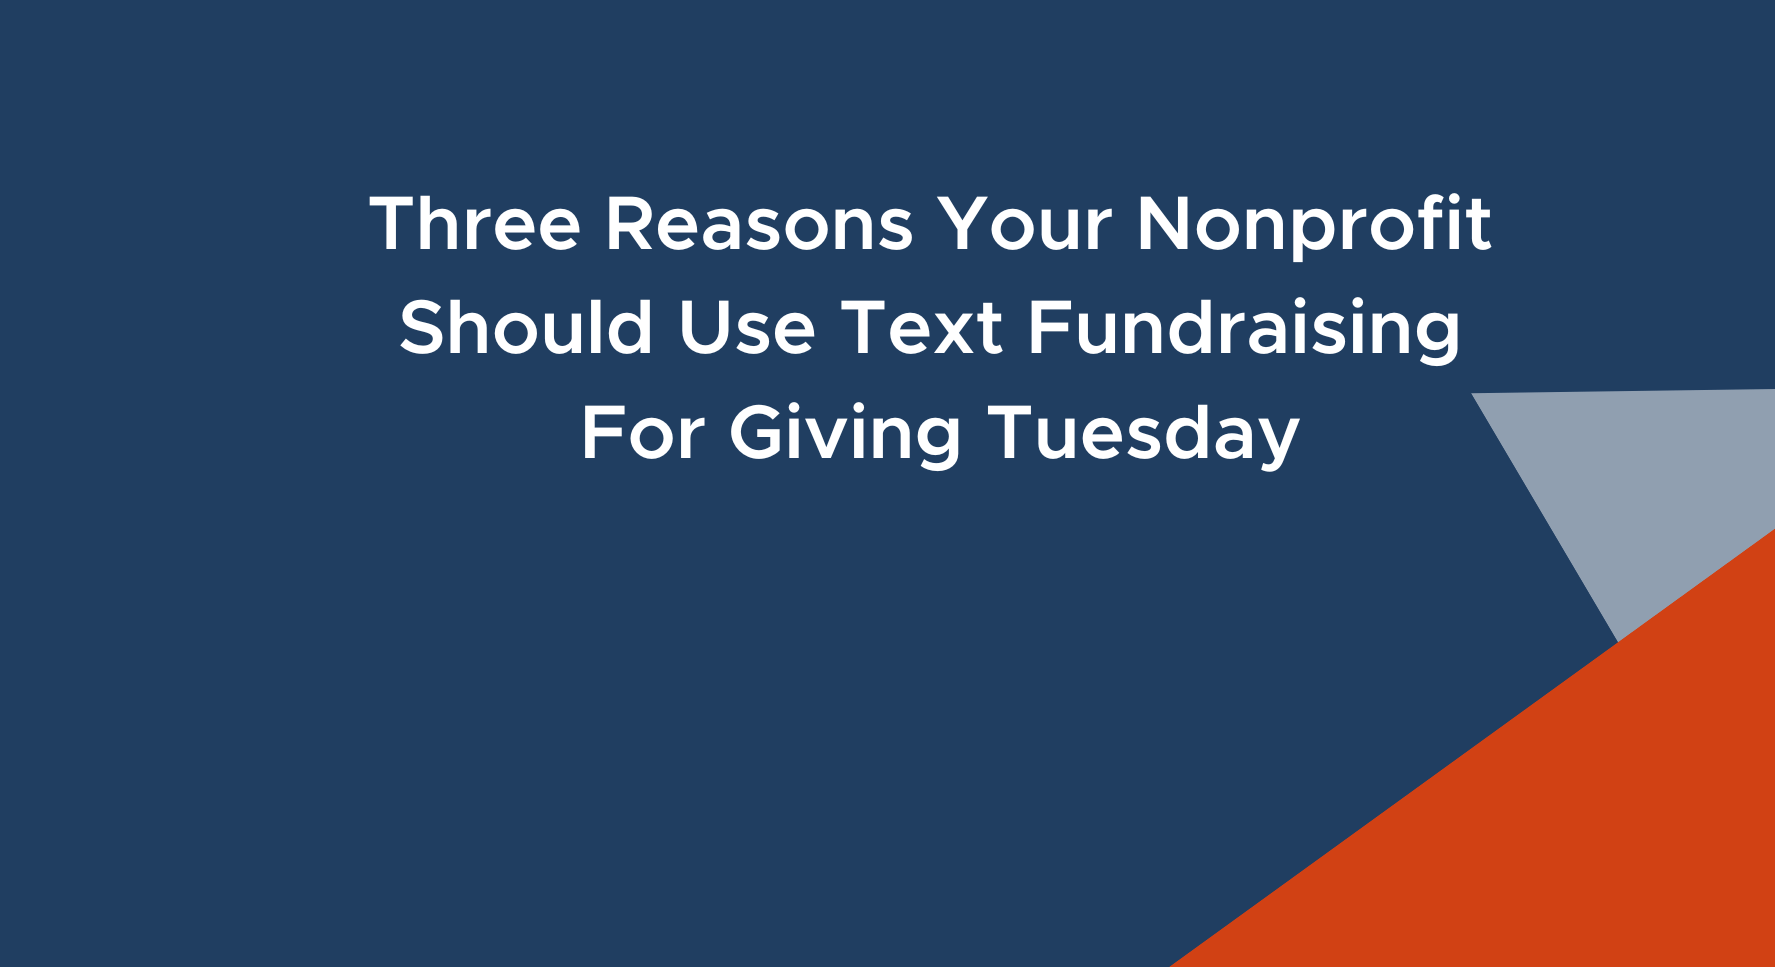 3 Reasons Why Your Nonprofit Should Use SMS for Giving Tuesday